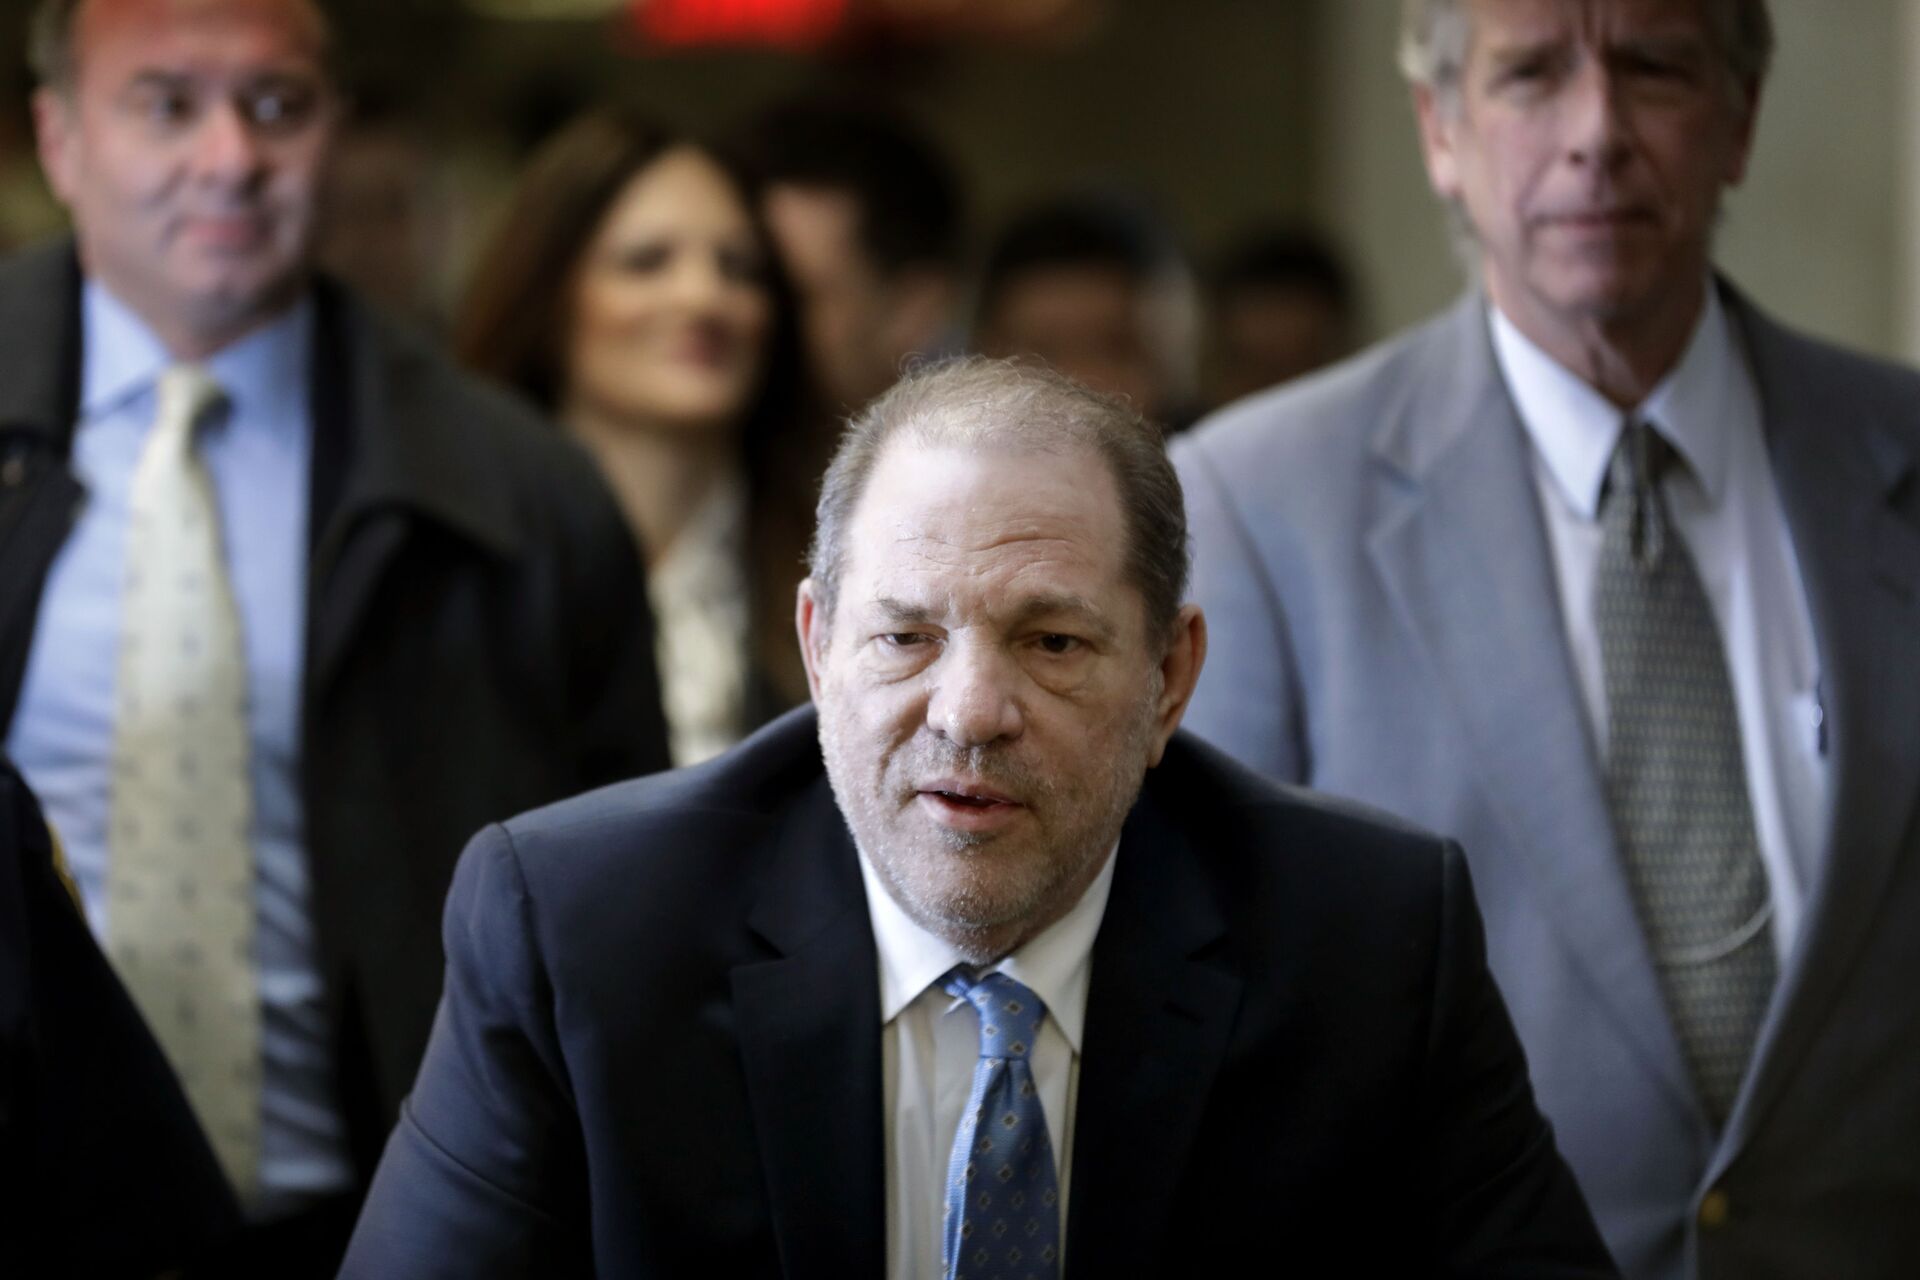 In this Feb. 24, 2020, file photo, Harvey Weinstein arrives at a Manhattan courthouse as jury deliberations continue in his rape trial in New York. The disgraced Hollywood film mogul and convicted rapist is asking a bankruptcy judge in Delaware to allow him to pursue arbitration in New York over what he claims is his wrongful termination from the company he co-founded. - Sputnik International, 1920, 07.09.2021